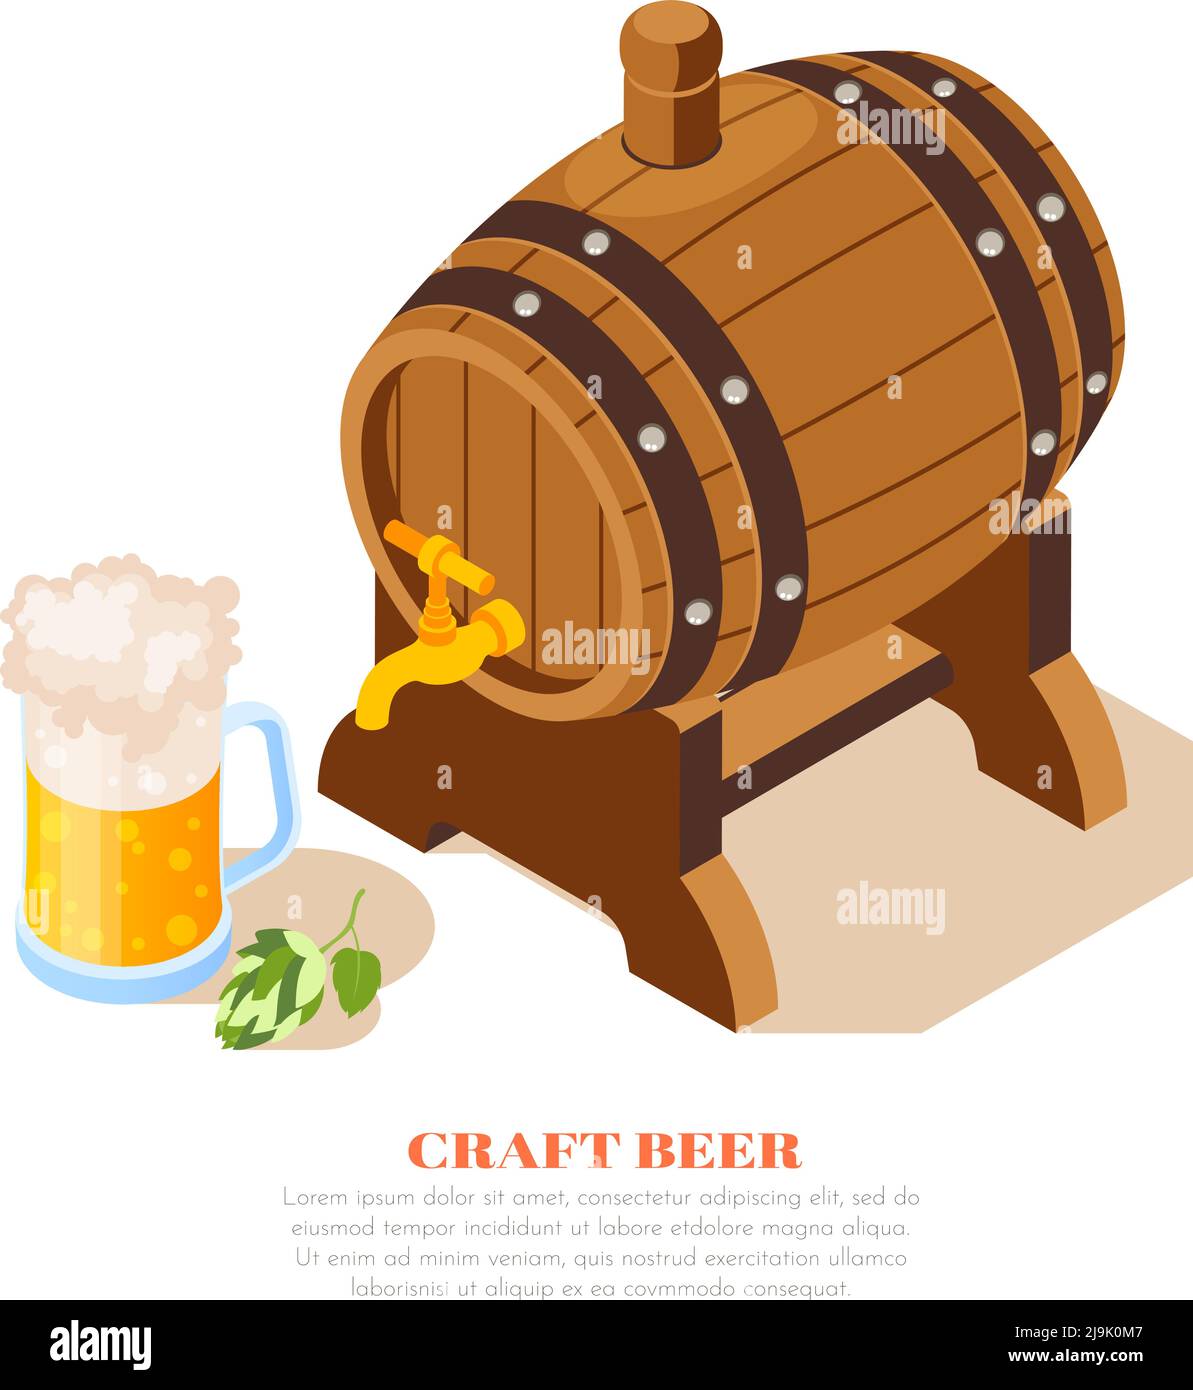 Local brewery craft beer pub advertisement isometric composition with oak barrel full mug hop leaves vector illustration Stock Vector